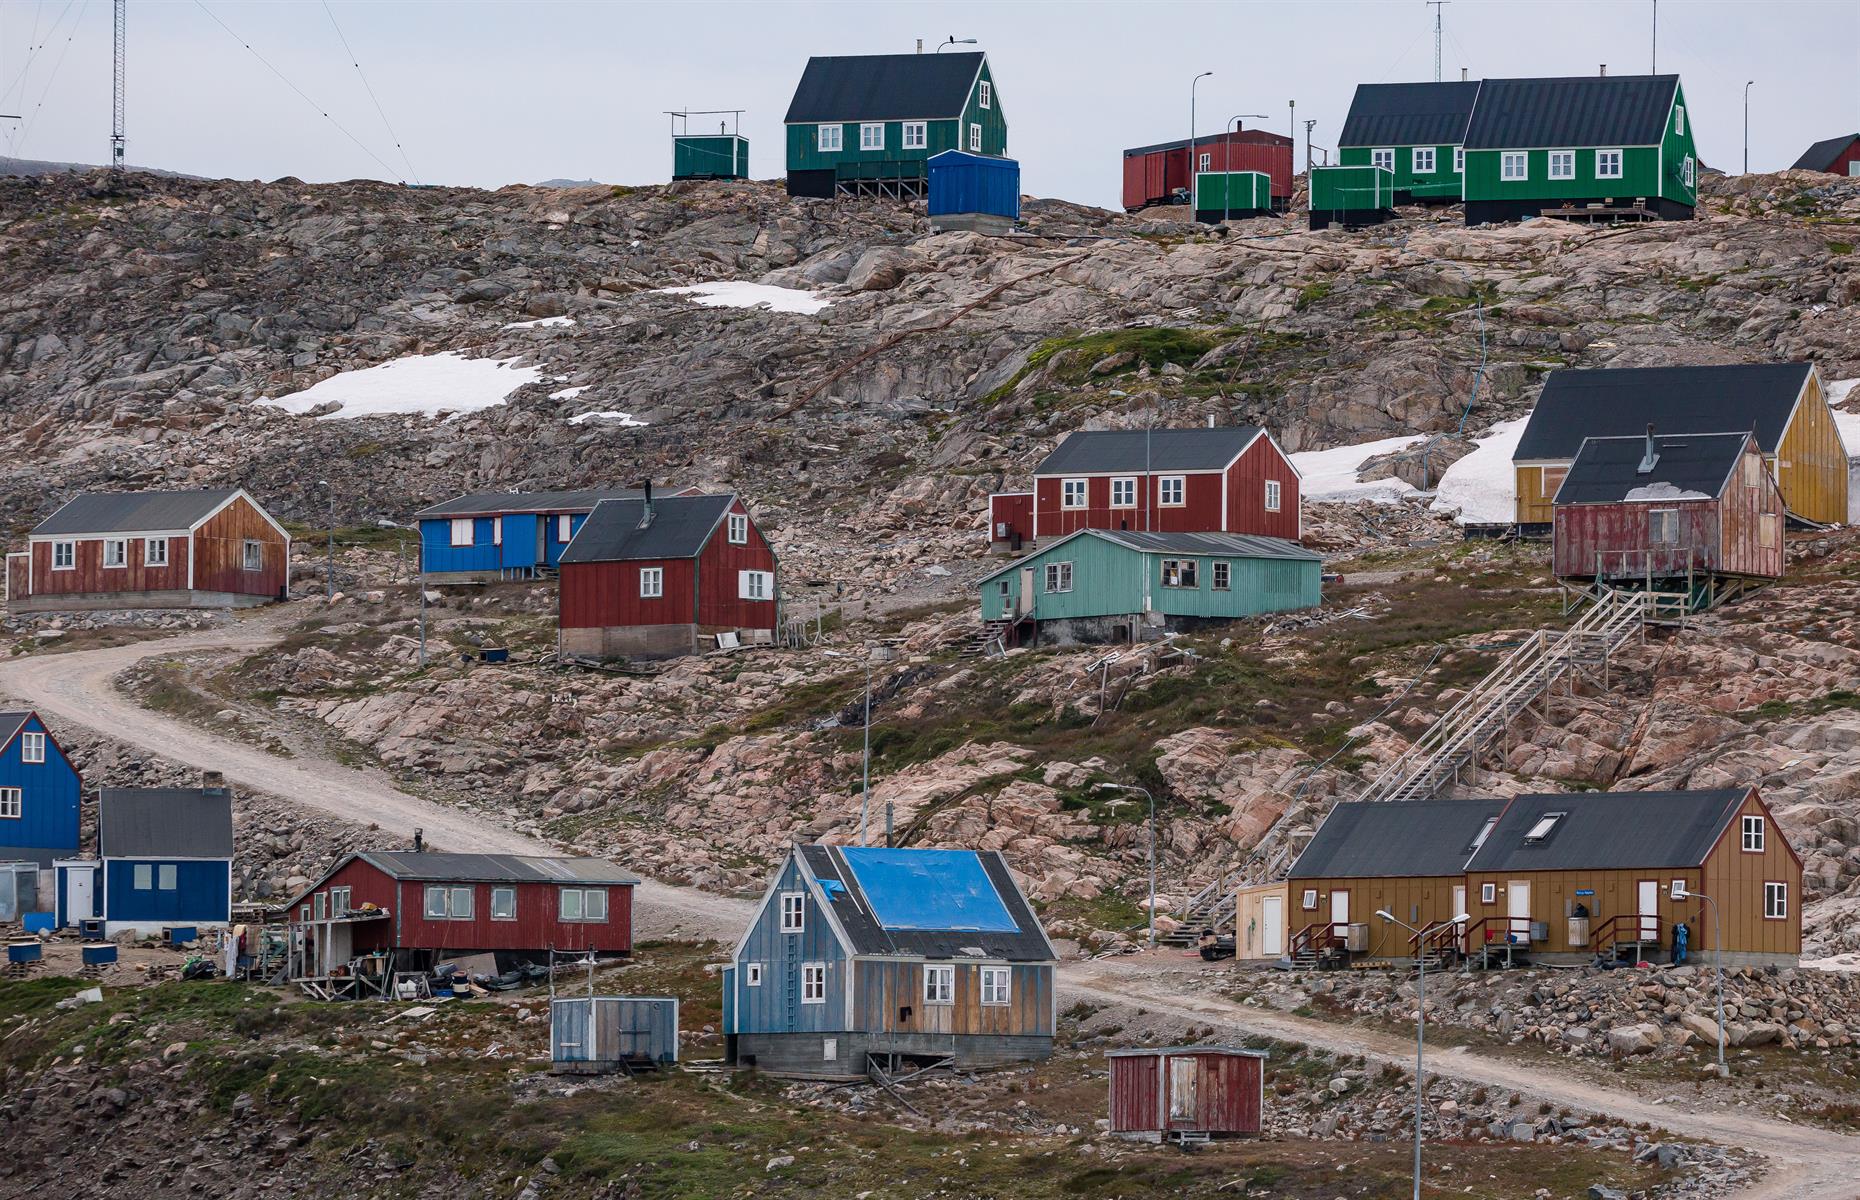 <p>The small town of Ittoqqortoormiit in Greenland is the most remote inhabited community in the Western Hemisphere. Its closest neighbour is the Northeast Greenland National Park, the world's largest national park. Overrun by polar bears, reindeers and walruses, the only human presence in the park is the Sirius Sled Patrol, a Danish naval unit, so residents really are all on their own here.</p>